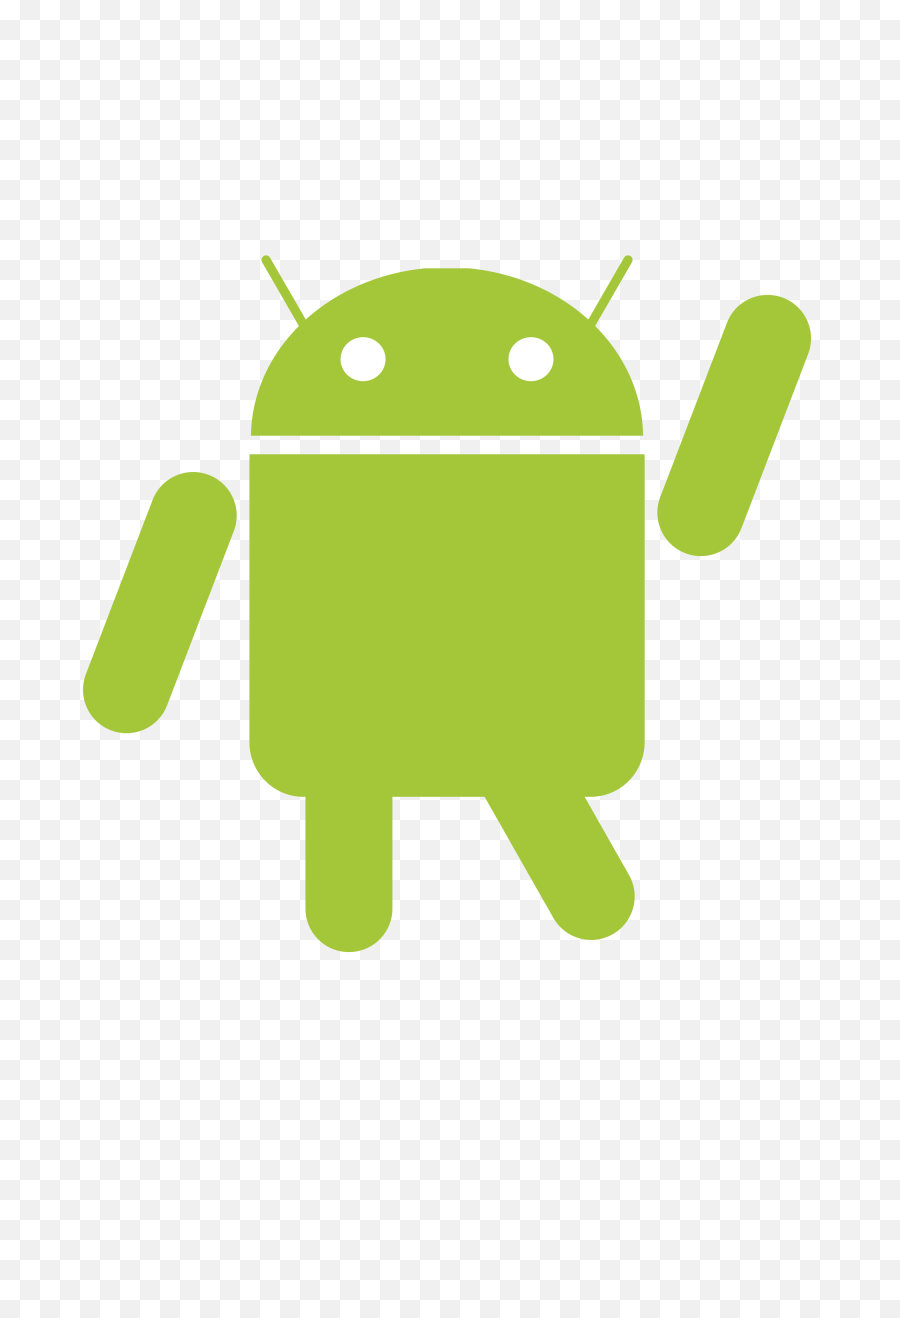 Android Logo Png Images Free Download - Android Logo No Background,Android Logo Transparent